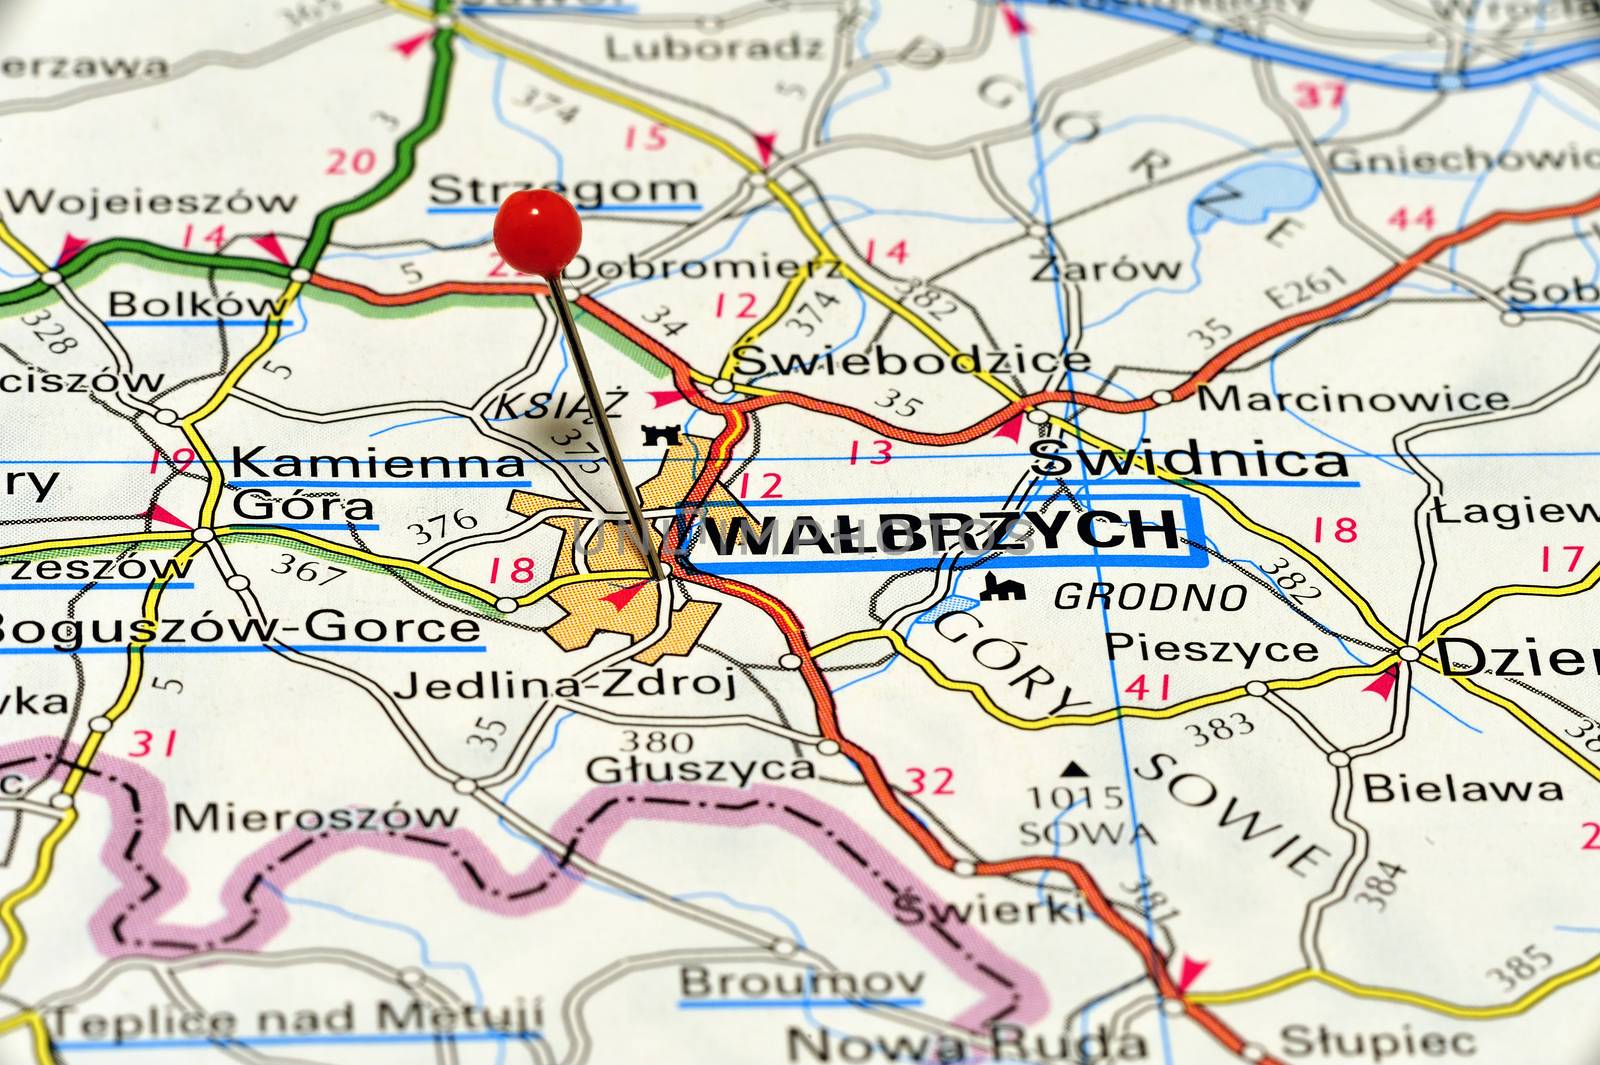 European cities on map series: Walbrzych